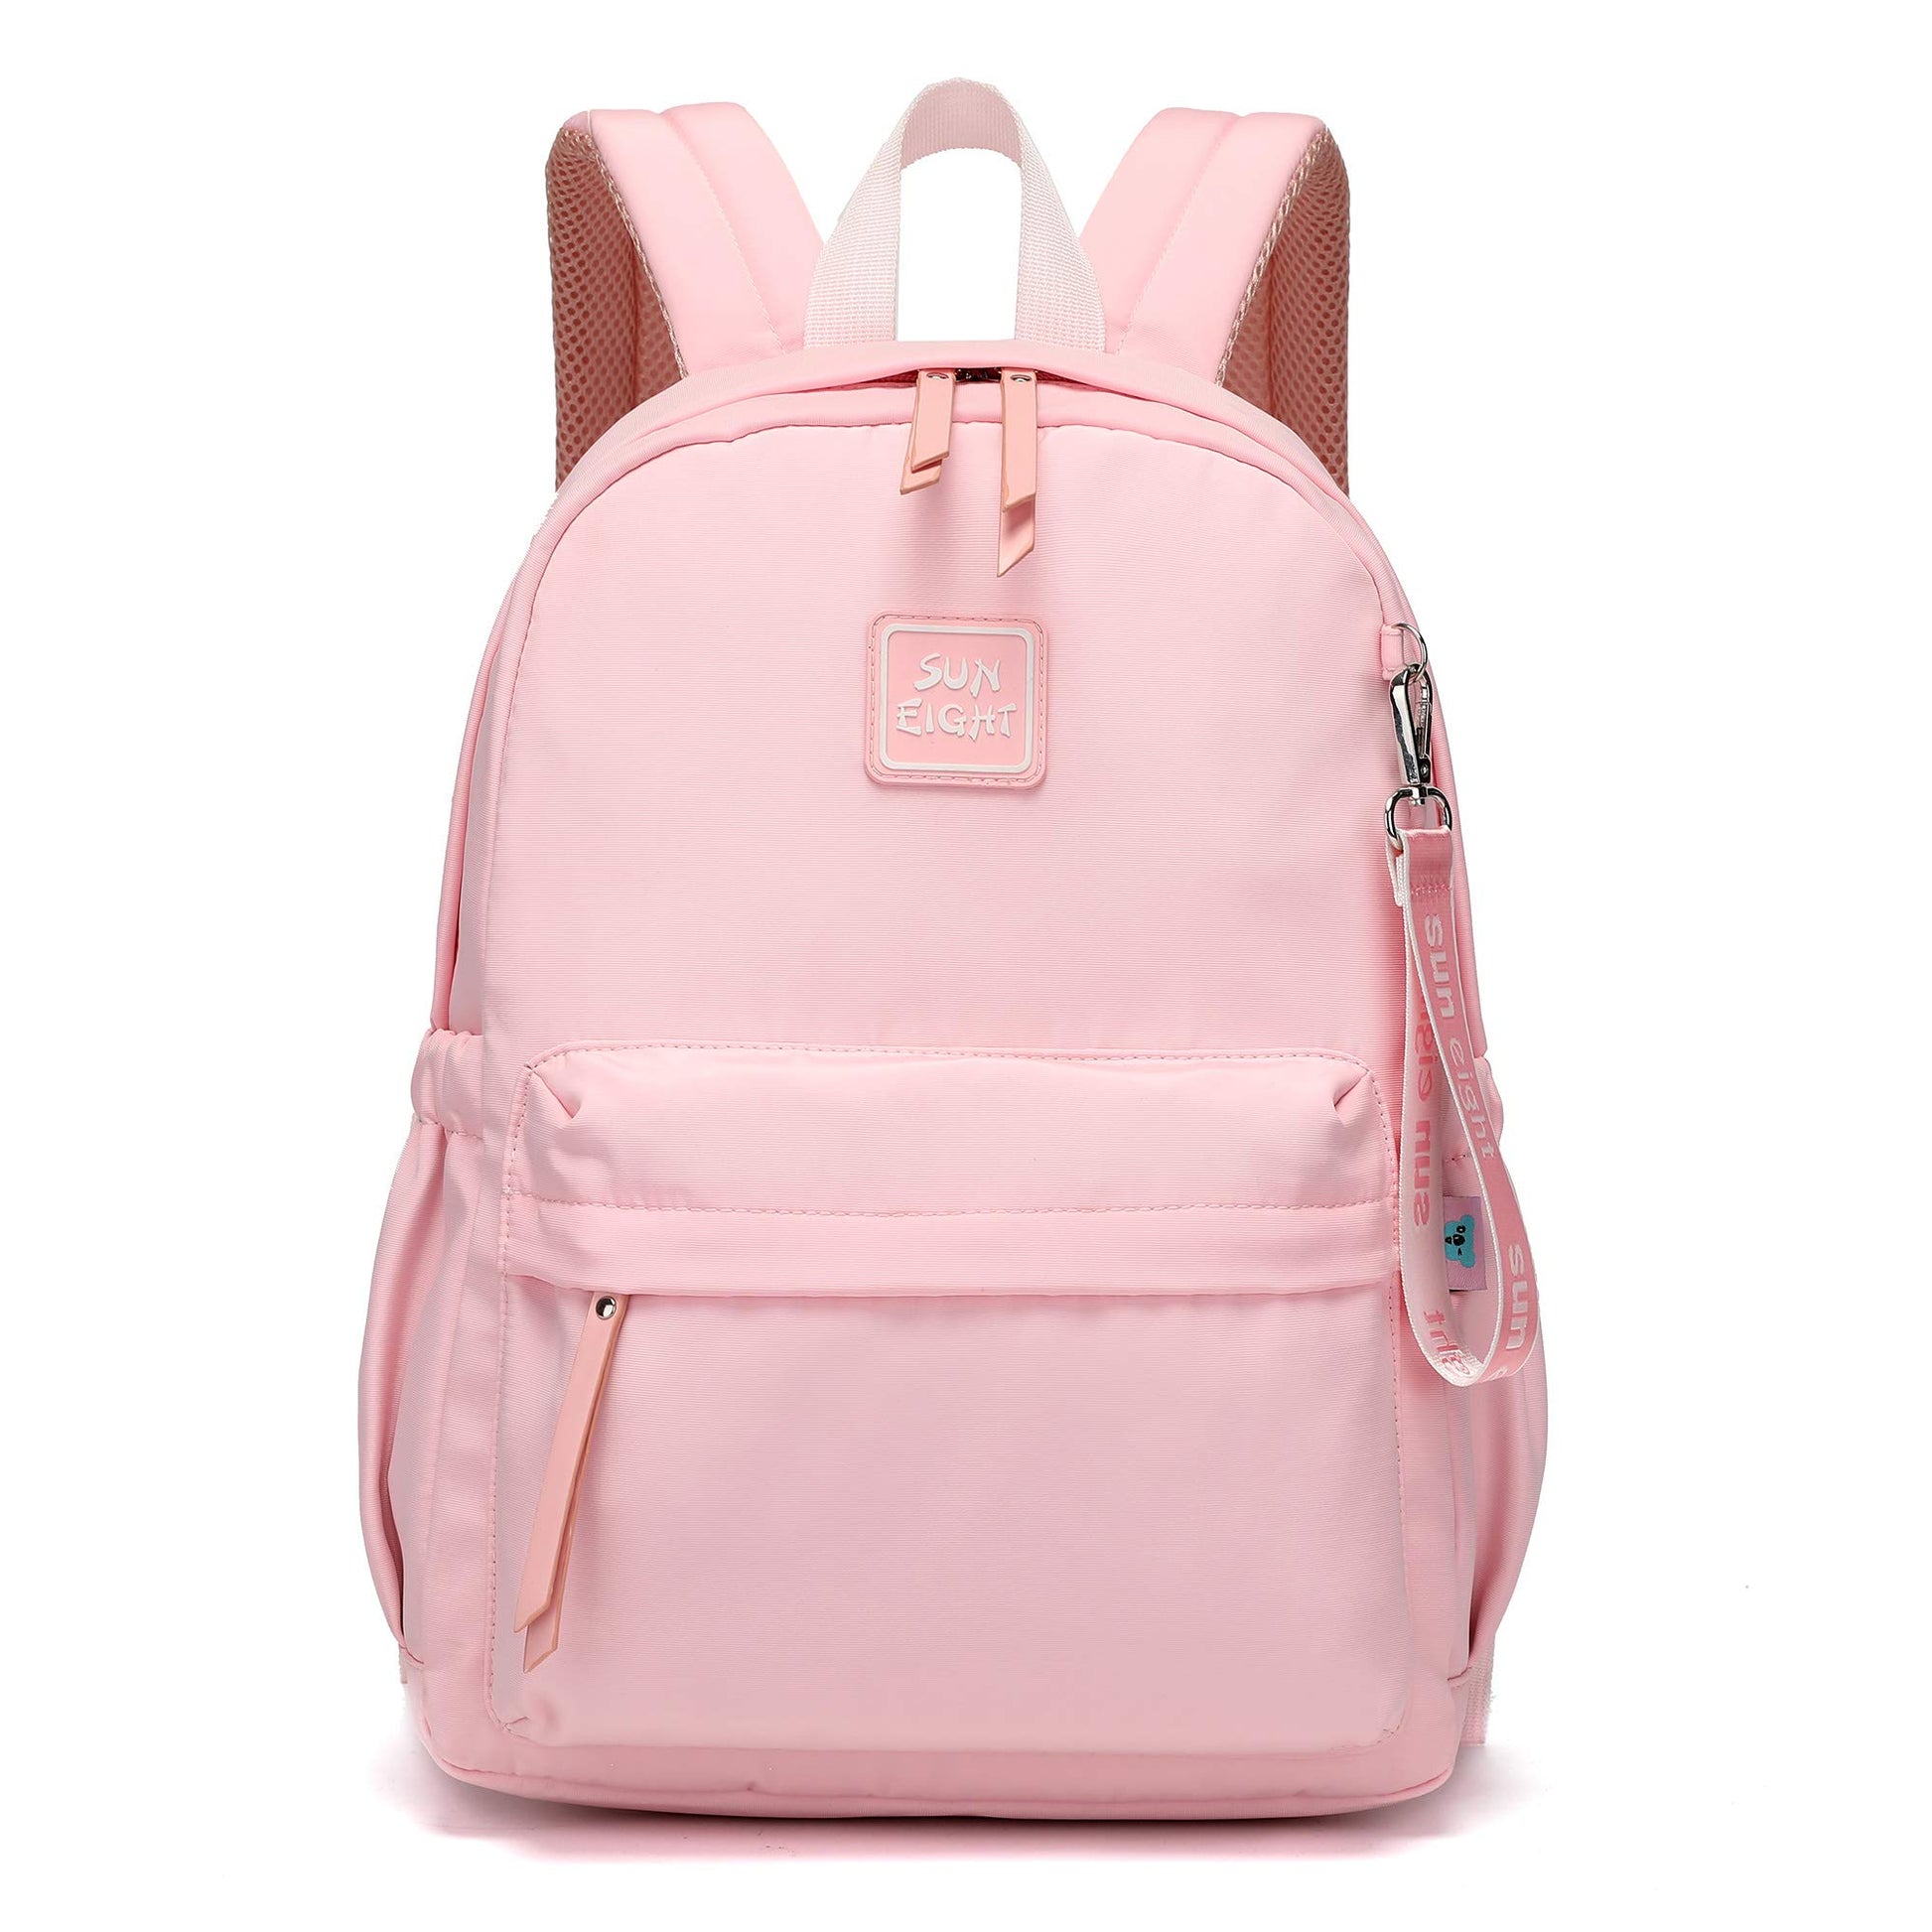 Caran·Y Kids Backpack Girls and Boys Classic School Backpack Light Weight Two Size Multi-pocket